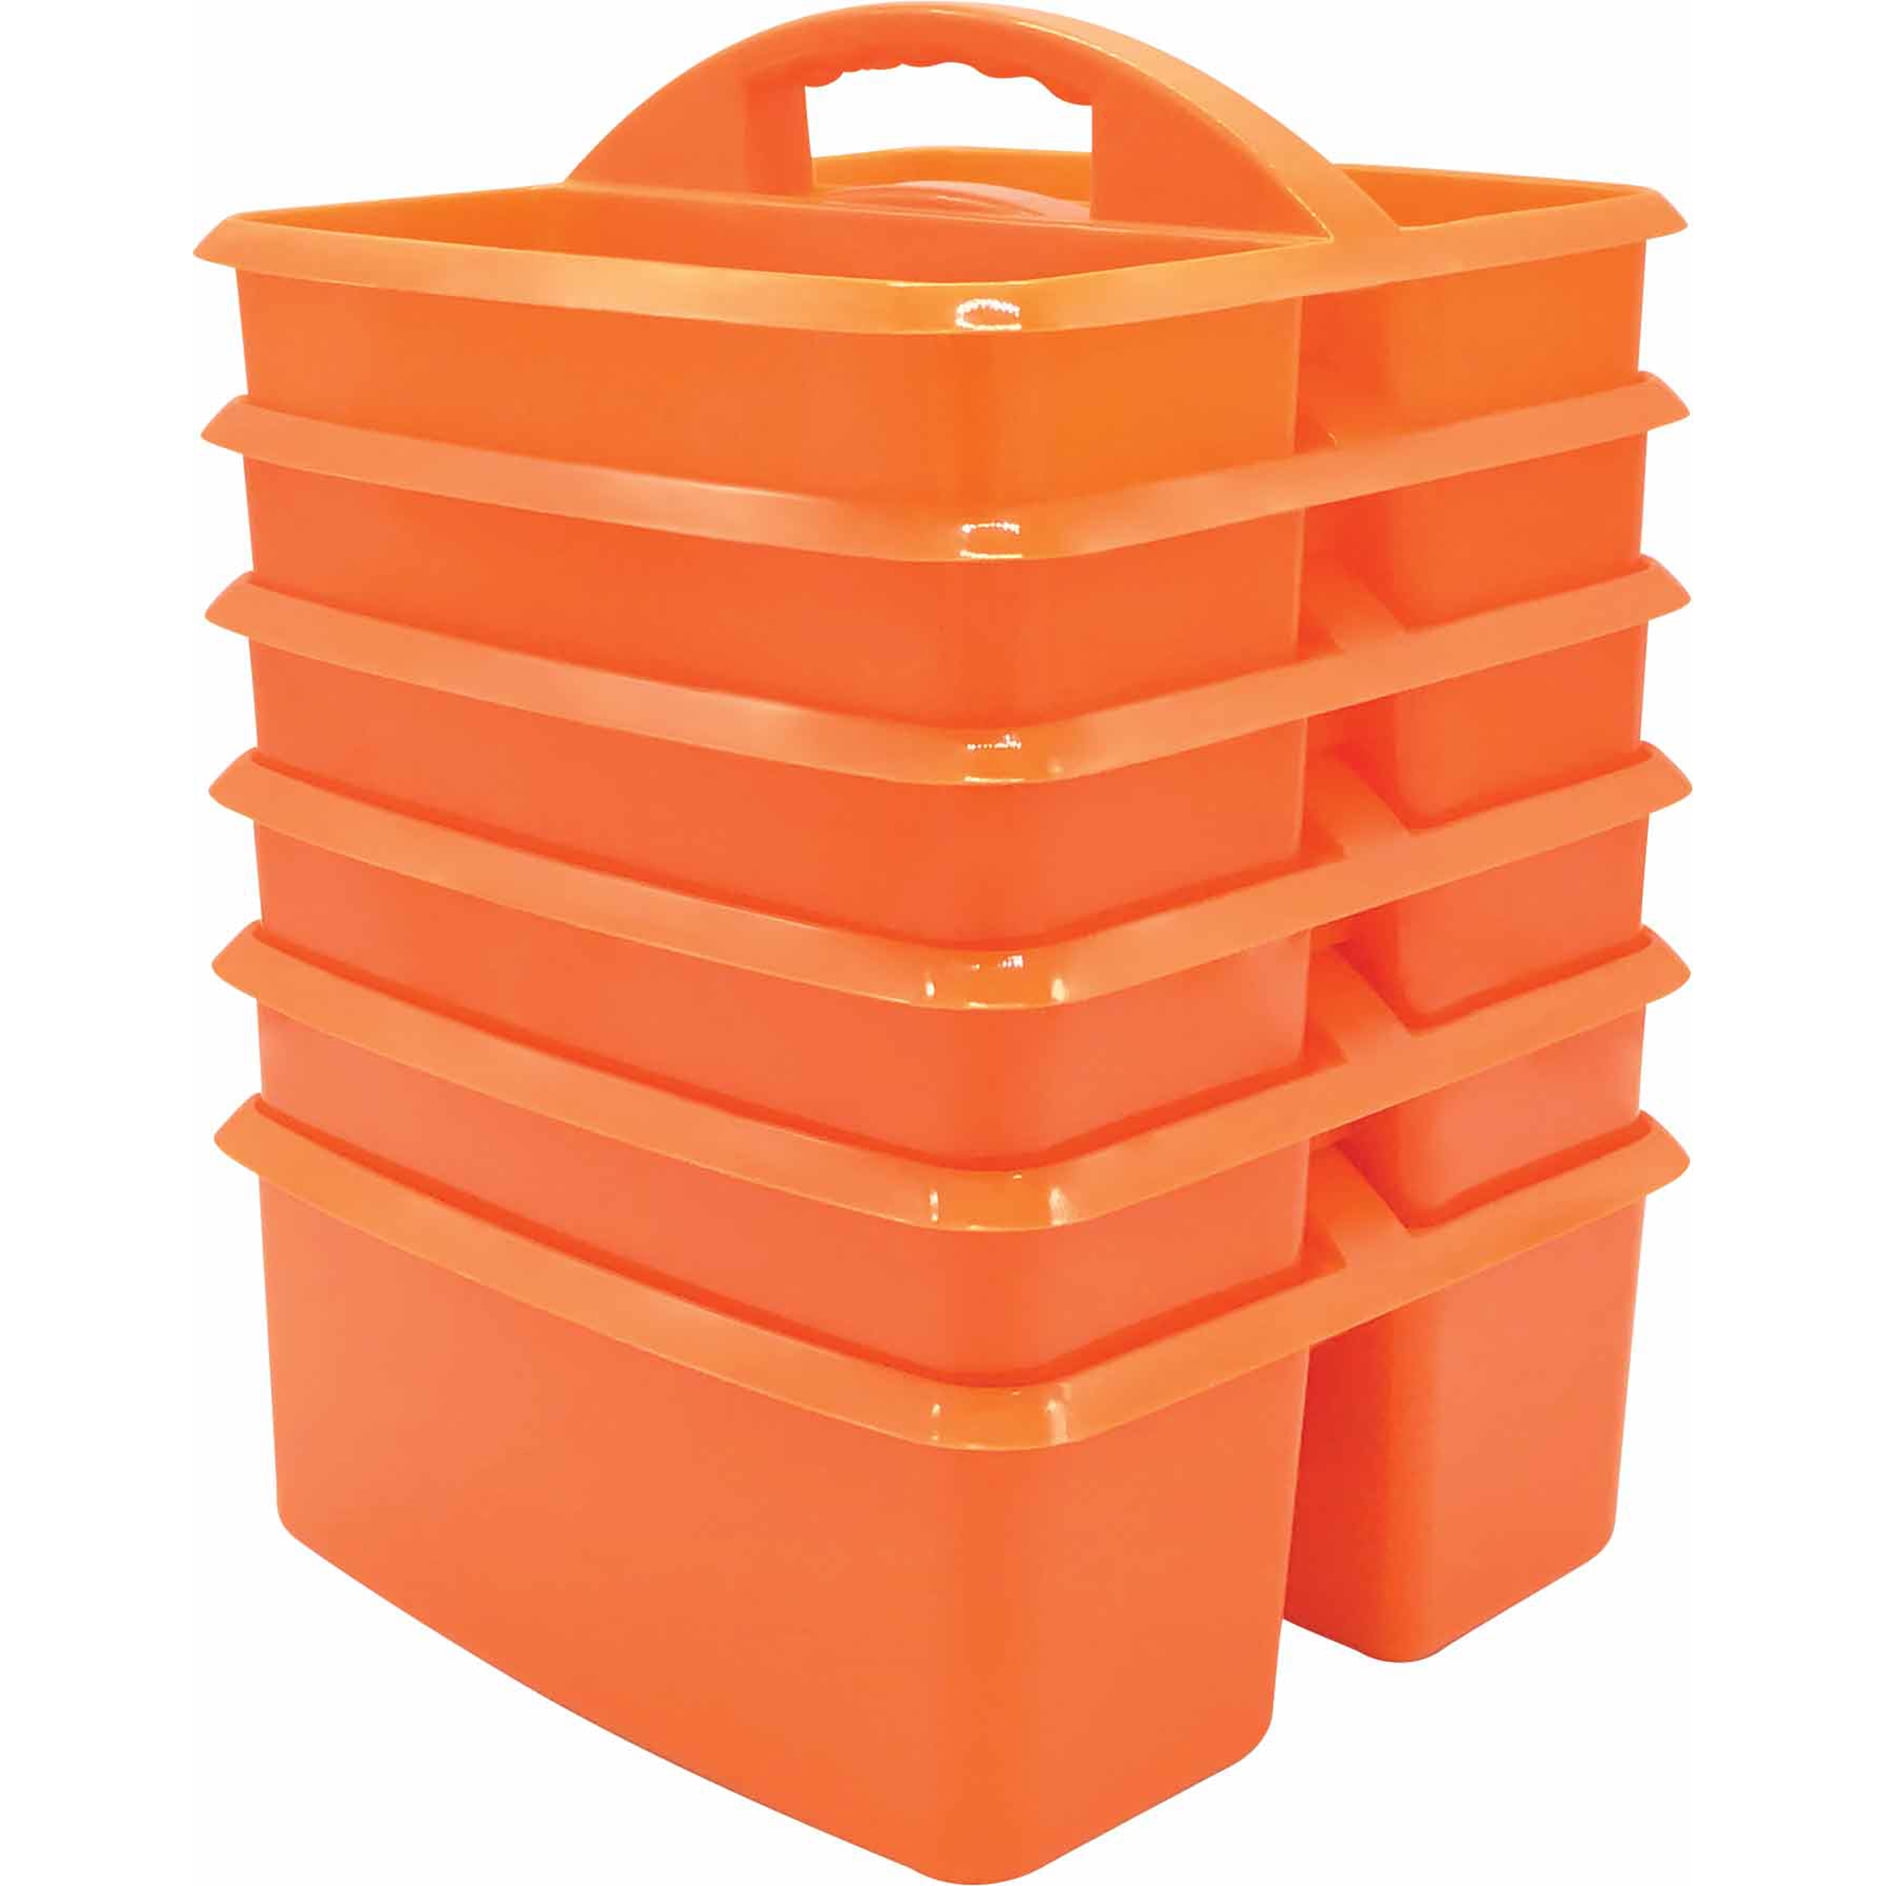 6 Multicolored Storage Caddies - Bulk Stackable Plastic Bins with 3  Compartments & Carrying Handle for Kids - Office Desk Organization for  Preschool